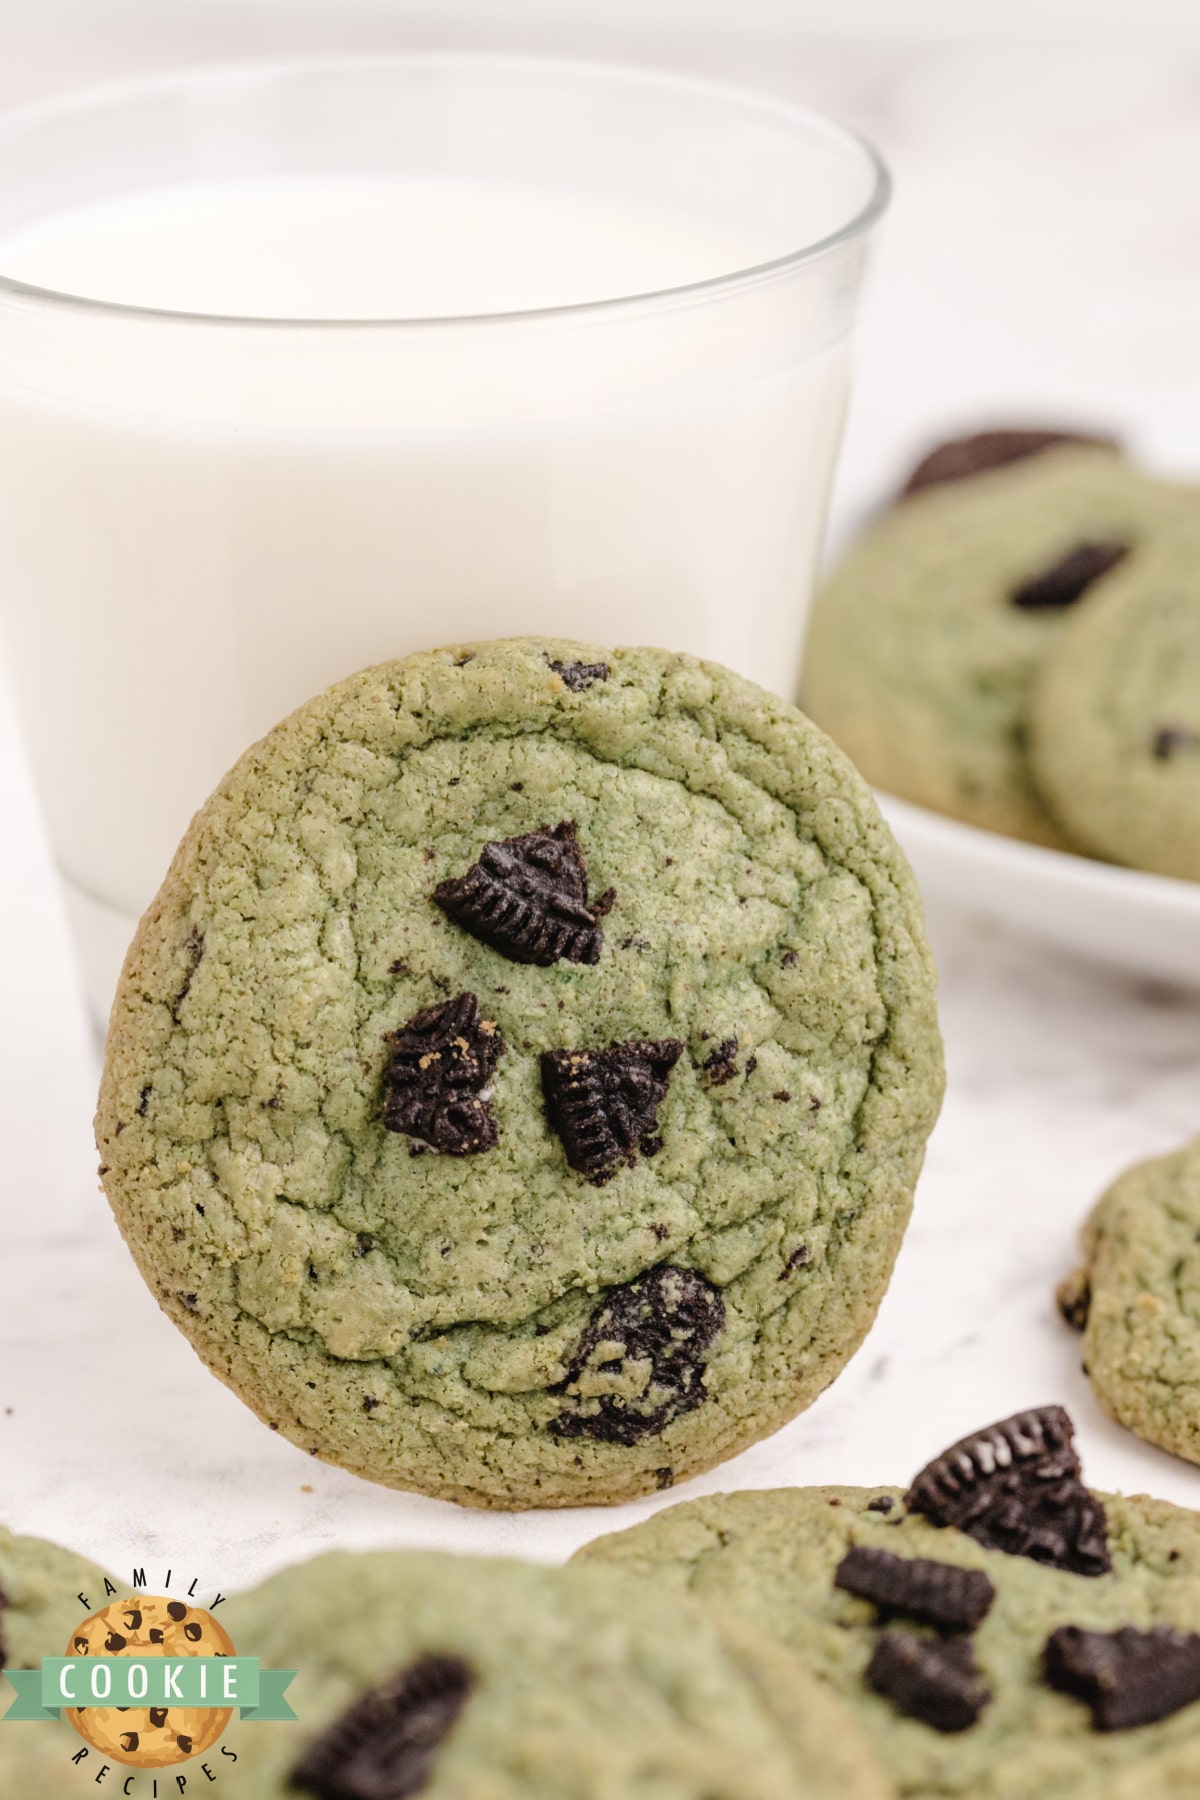 Mint Oreo Pudding Cookies are soft, chewy and full of mint flavor, Oreo pudding mix and crumbled Oreo cookies! The mint and chocolate flavor combination is a winner in these amazing cookies!